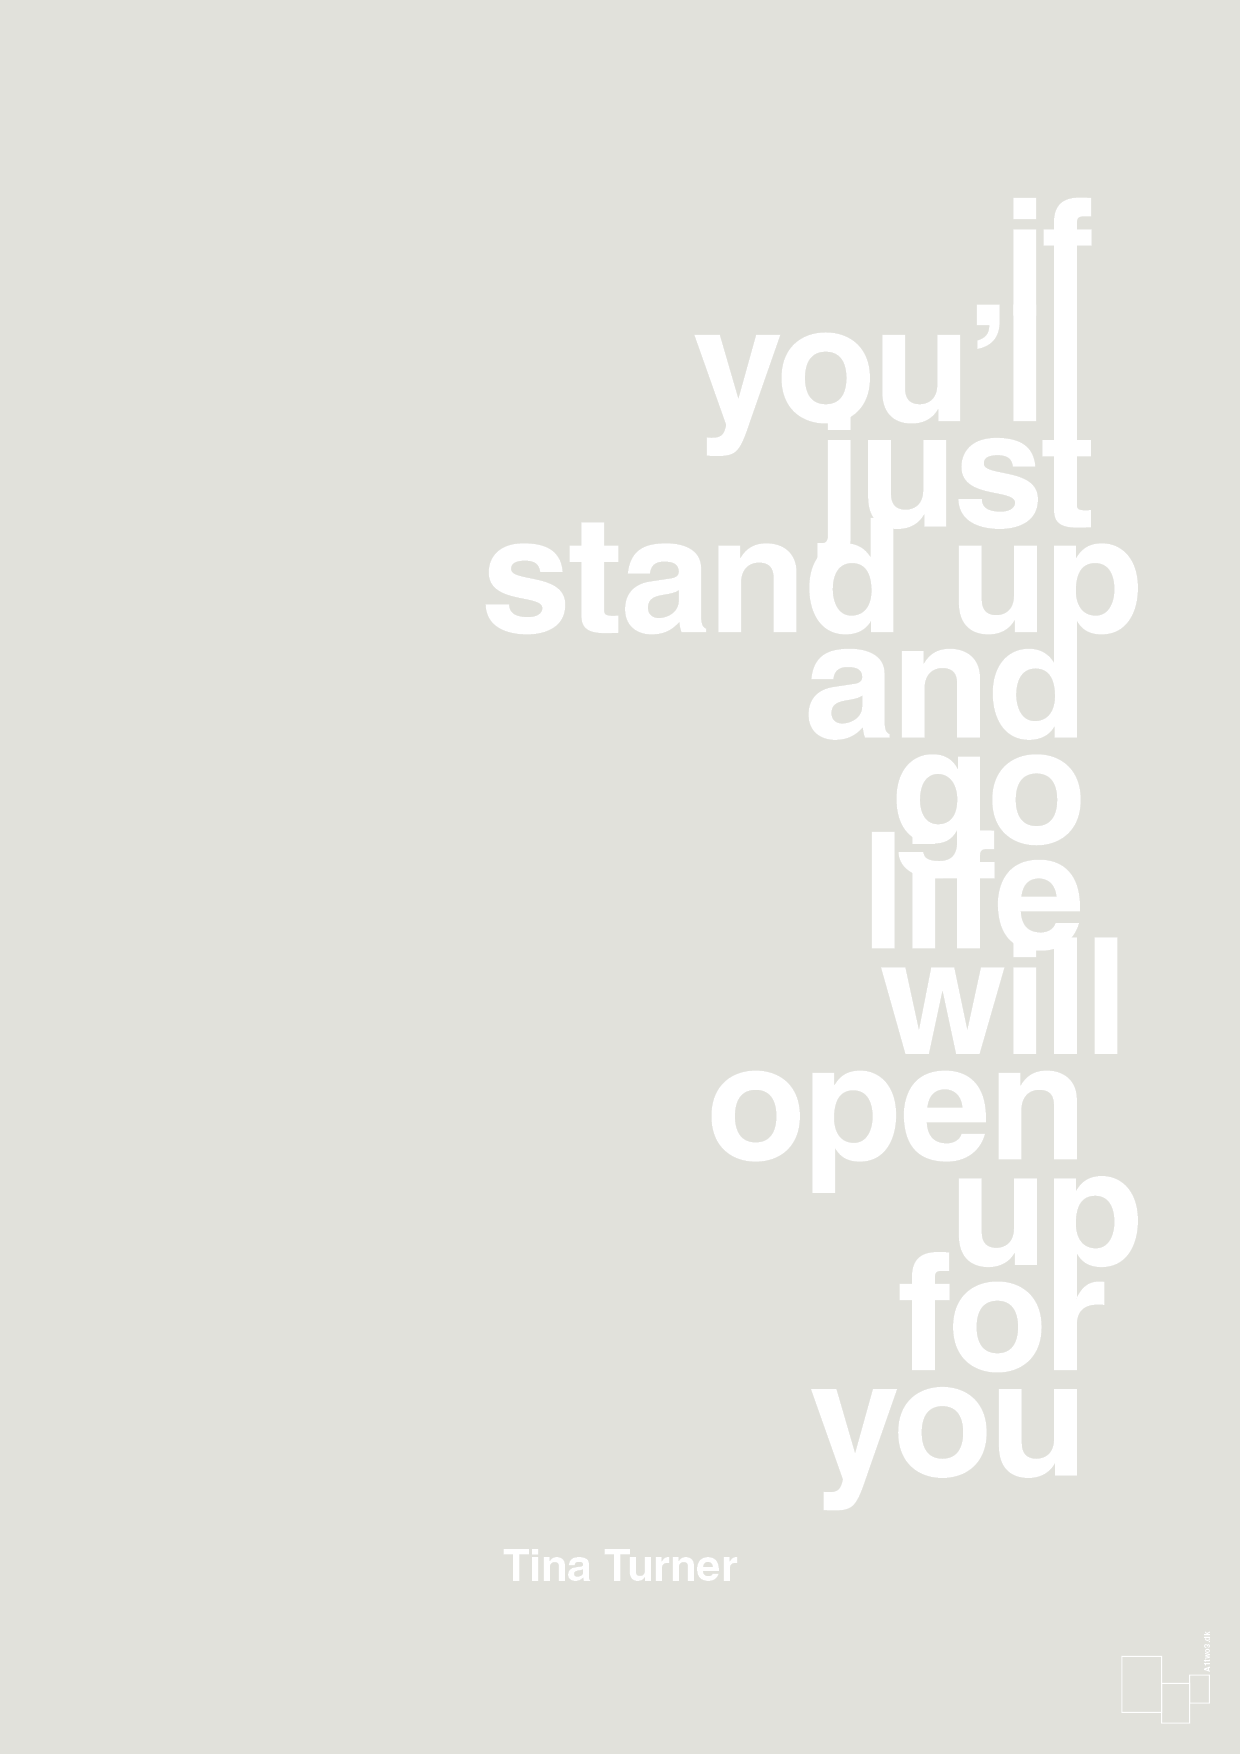 if you’ll just stand up and go life will open up for you - Plakat med Citater i Painters White